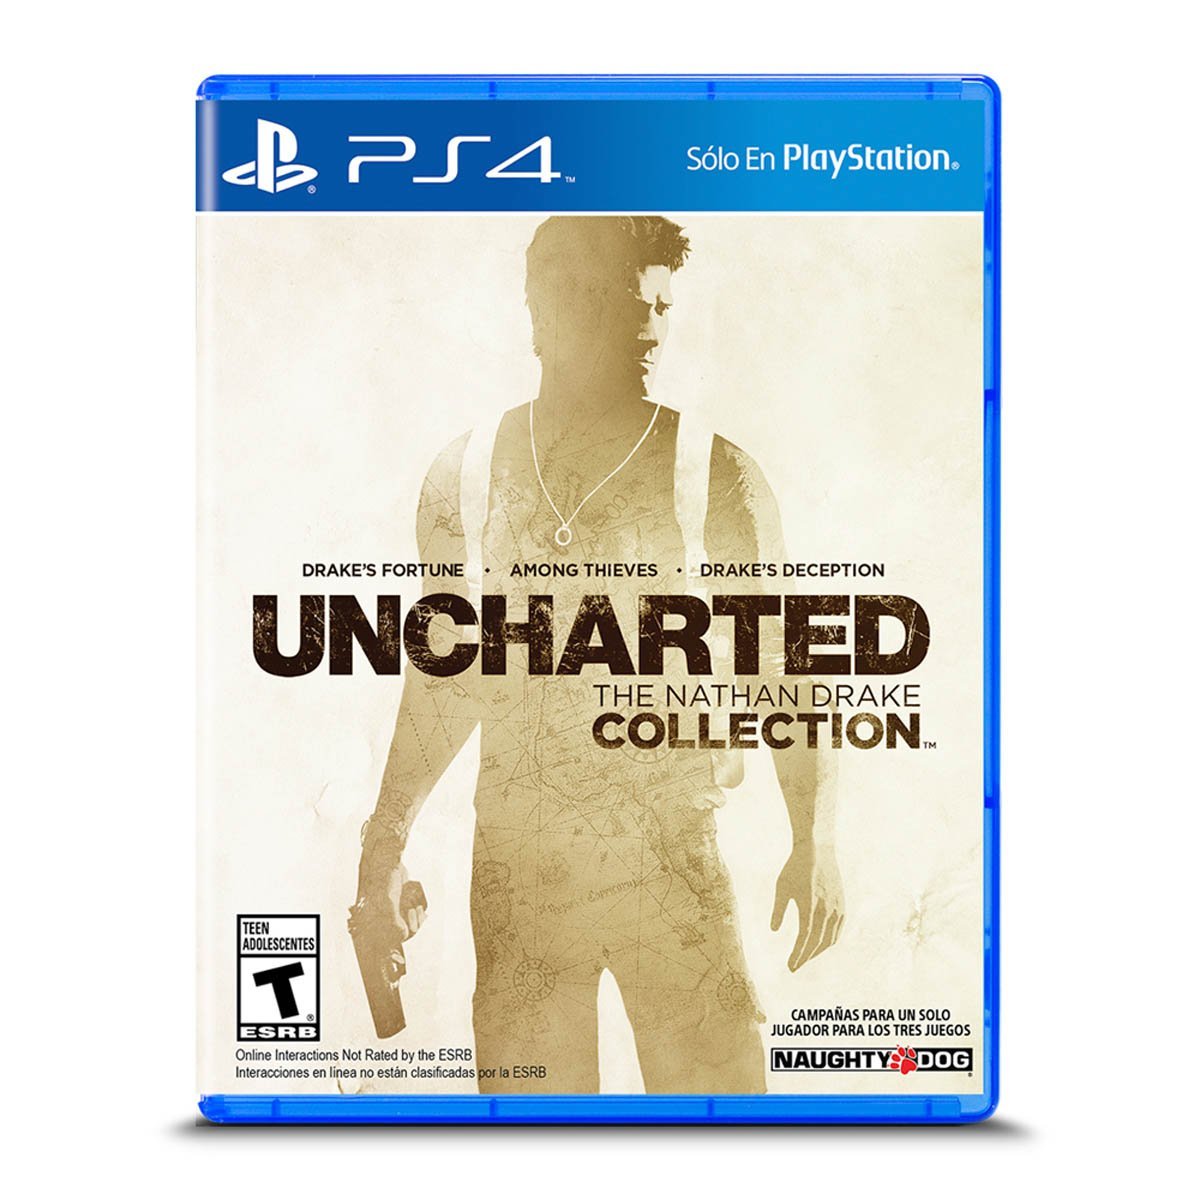 Ps4 Uncharted The Nathan Drake Collection